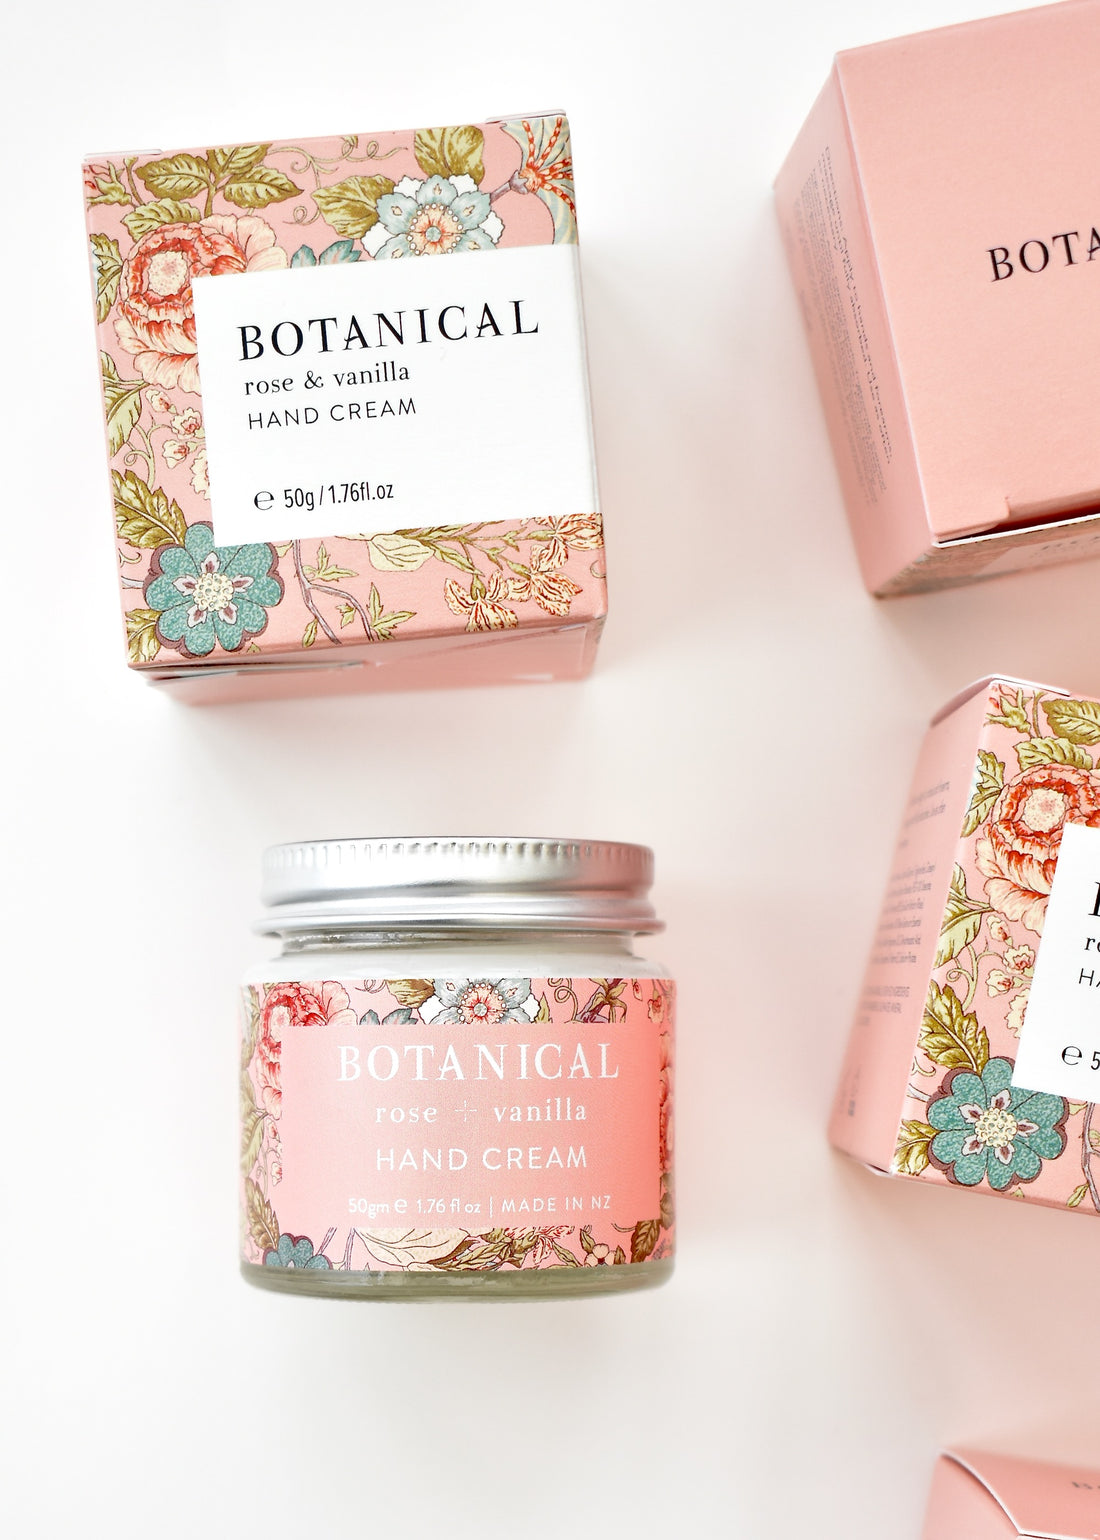 Small pale pink boxes containing jar of rose &amp; vanilla handcream